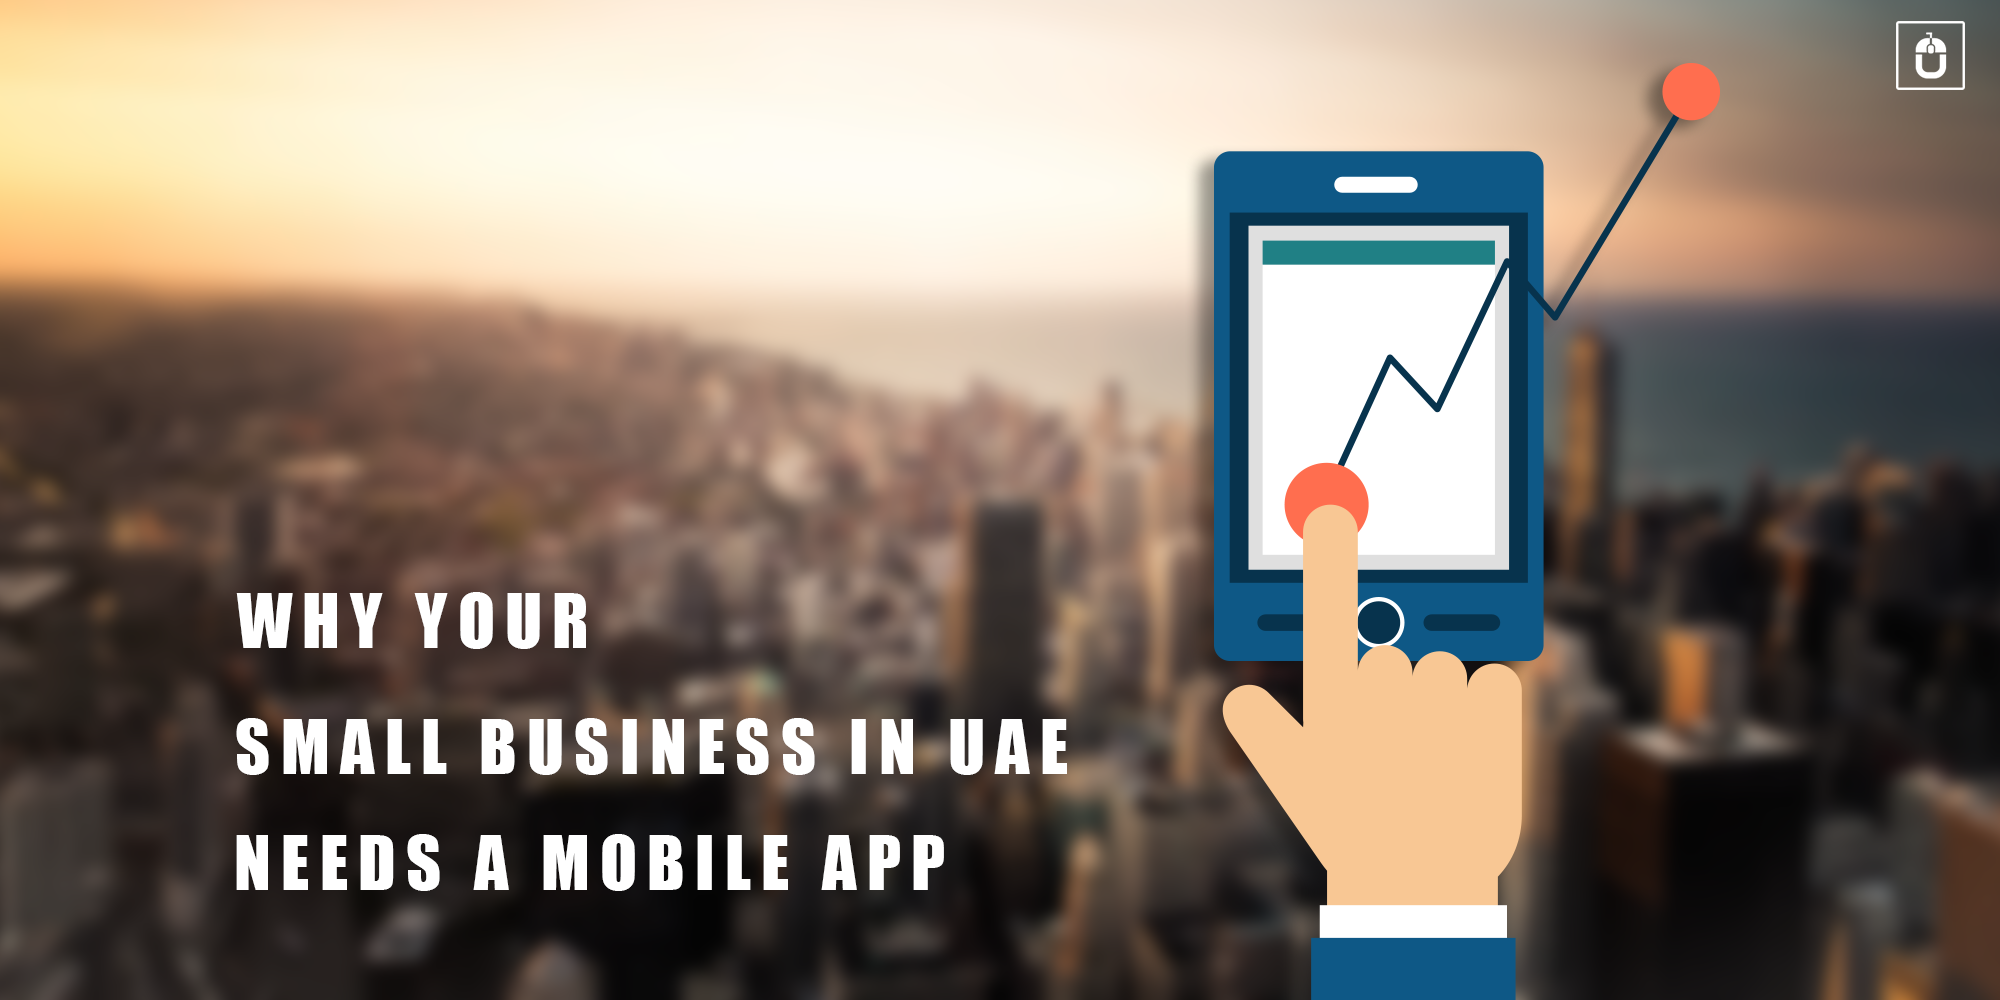 WHY YOUR SMALL BUSINESS IN UAE NEEDS A MOBILE APP